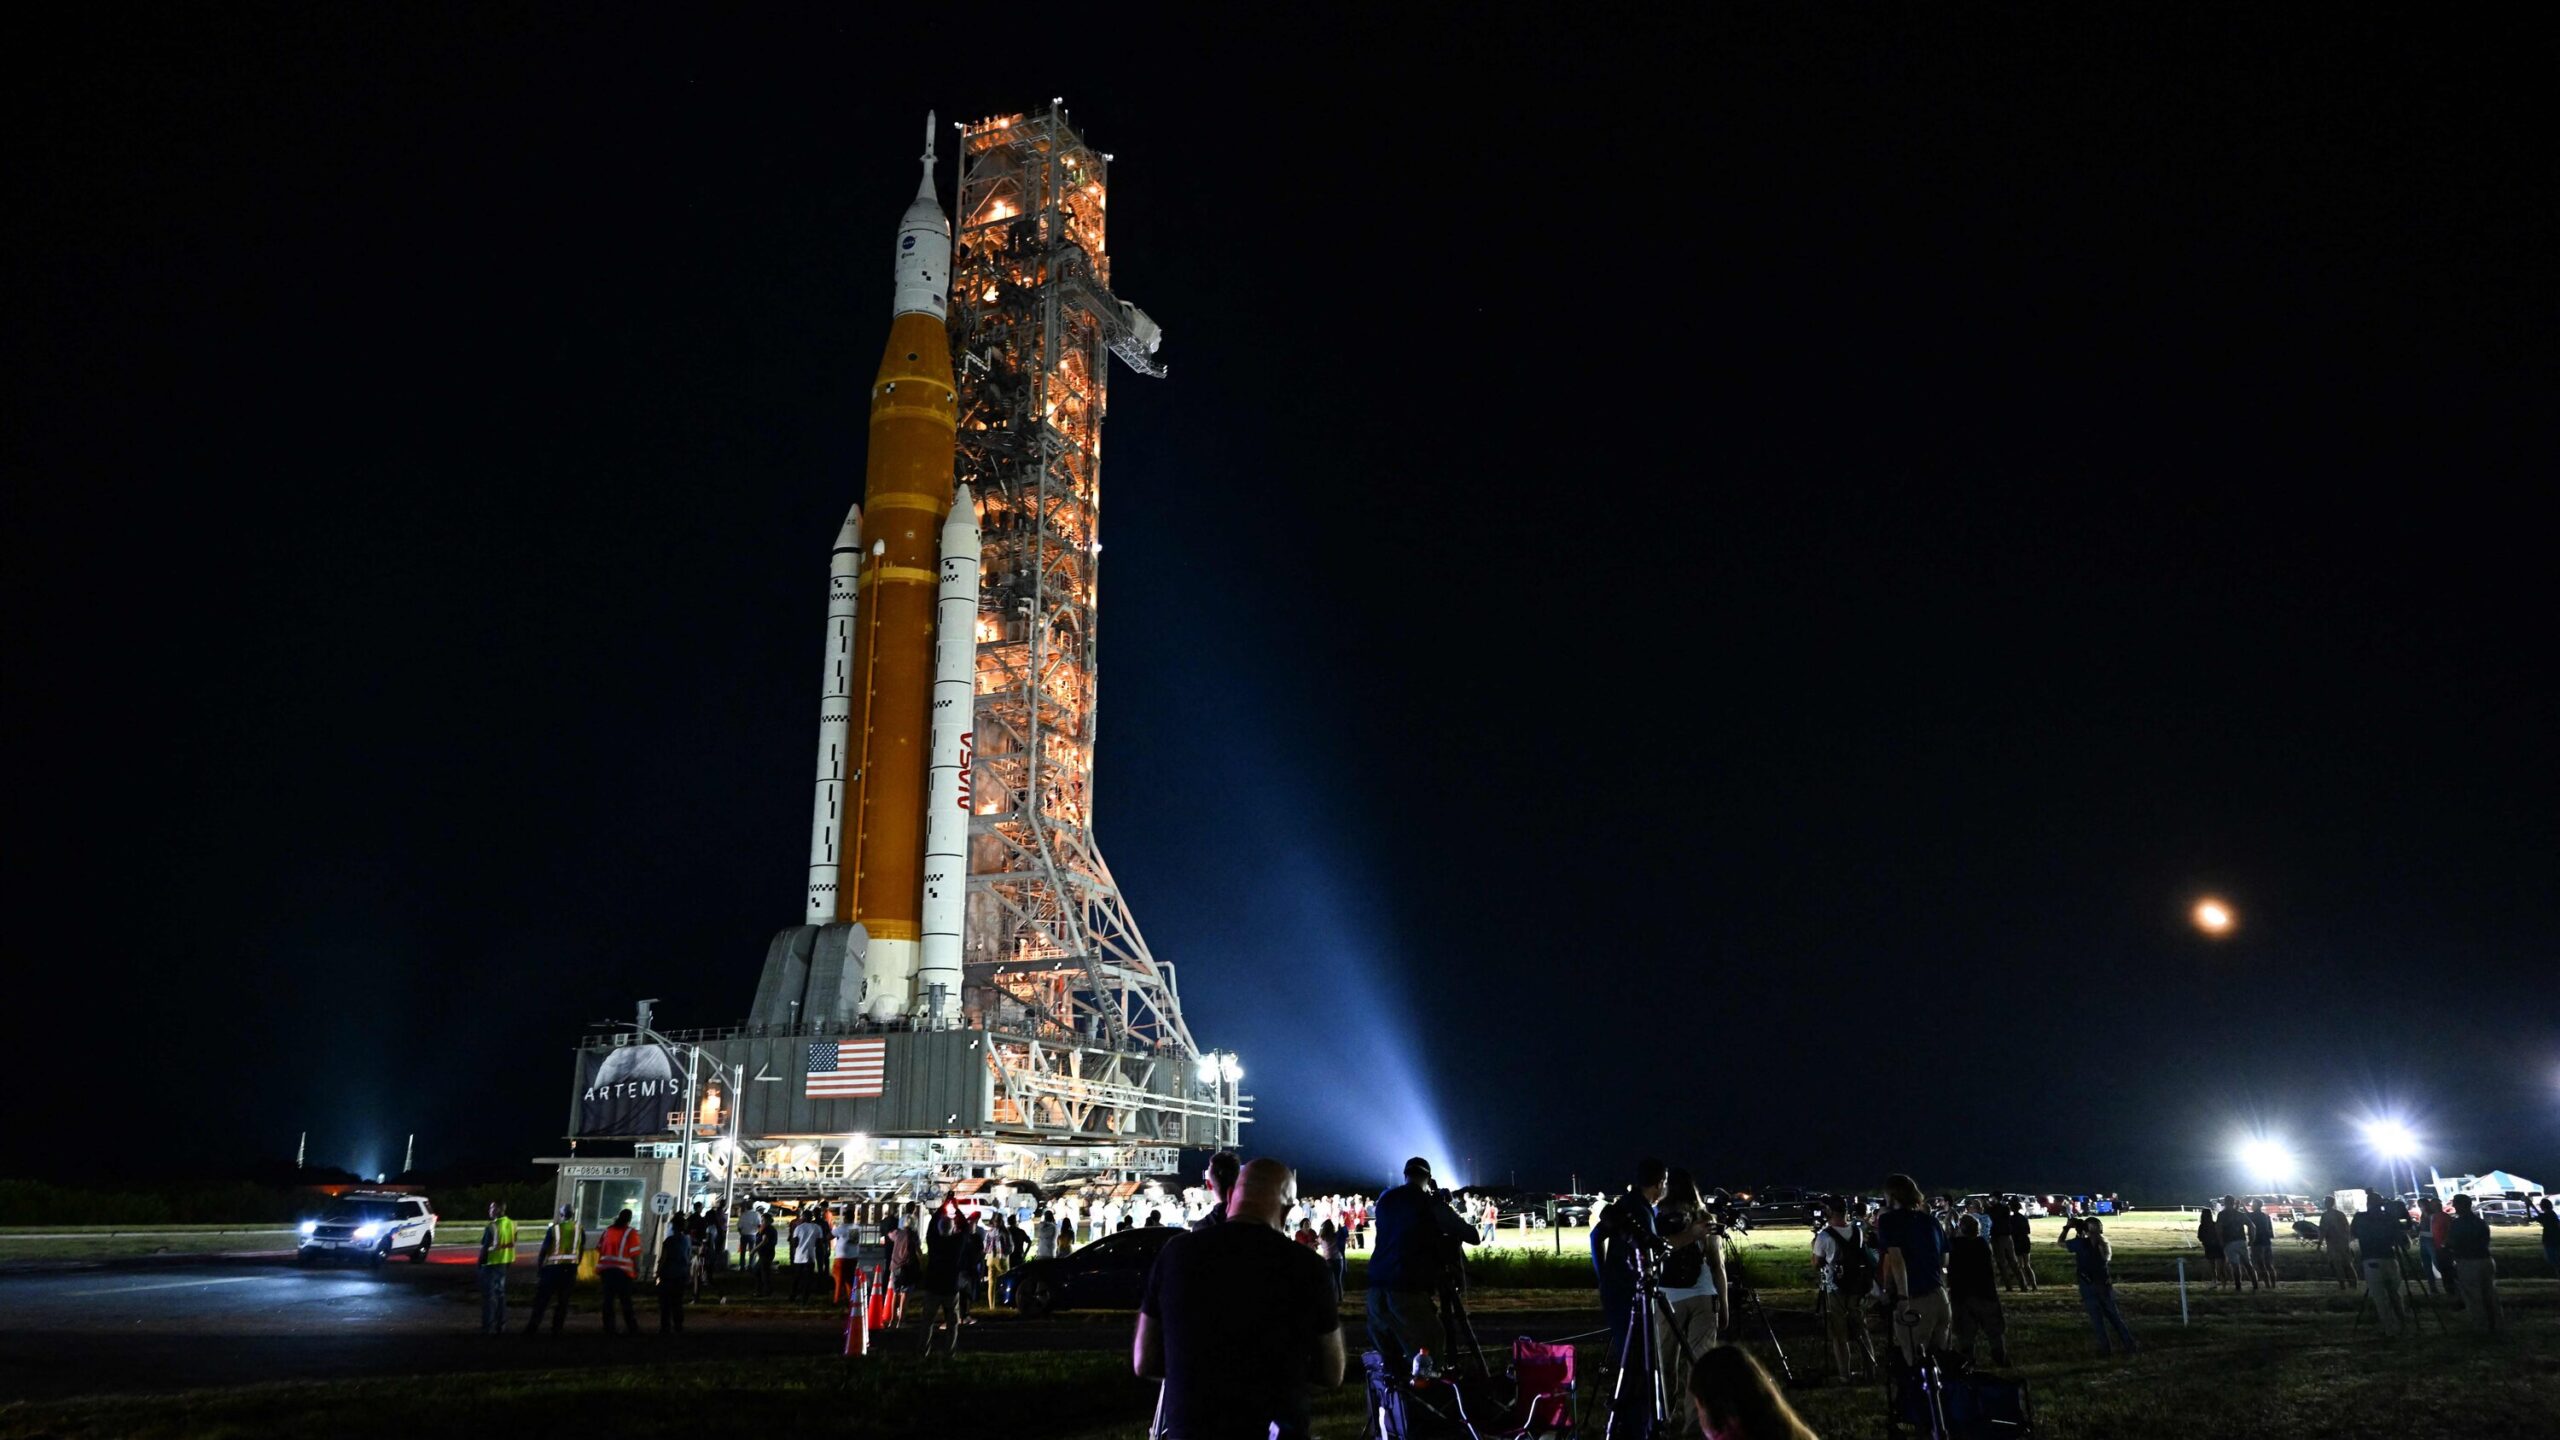 NASA’s new Space Launch System moon rocket Artemis 1 rolled out to launch pad ahead of August 29